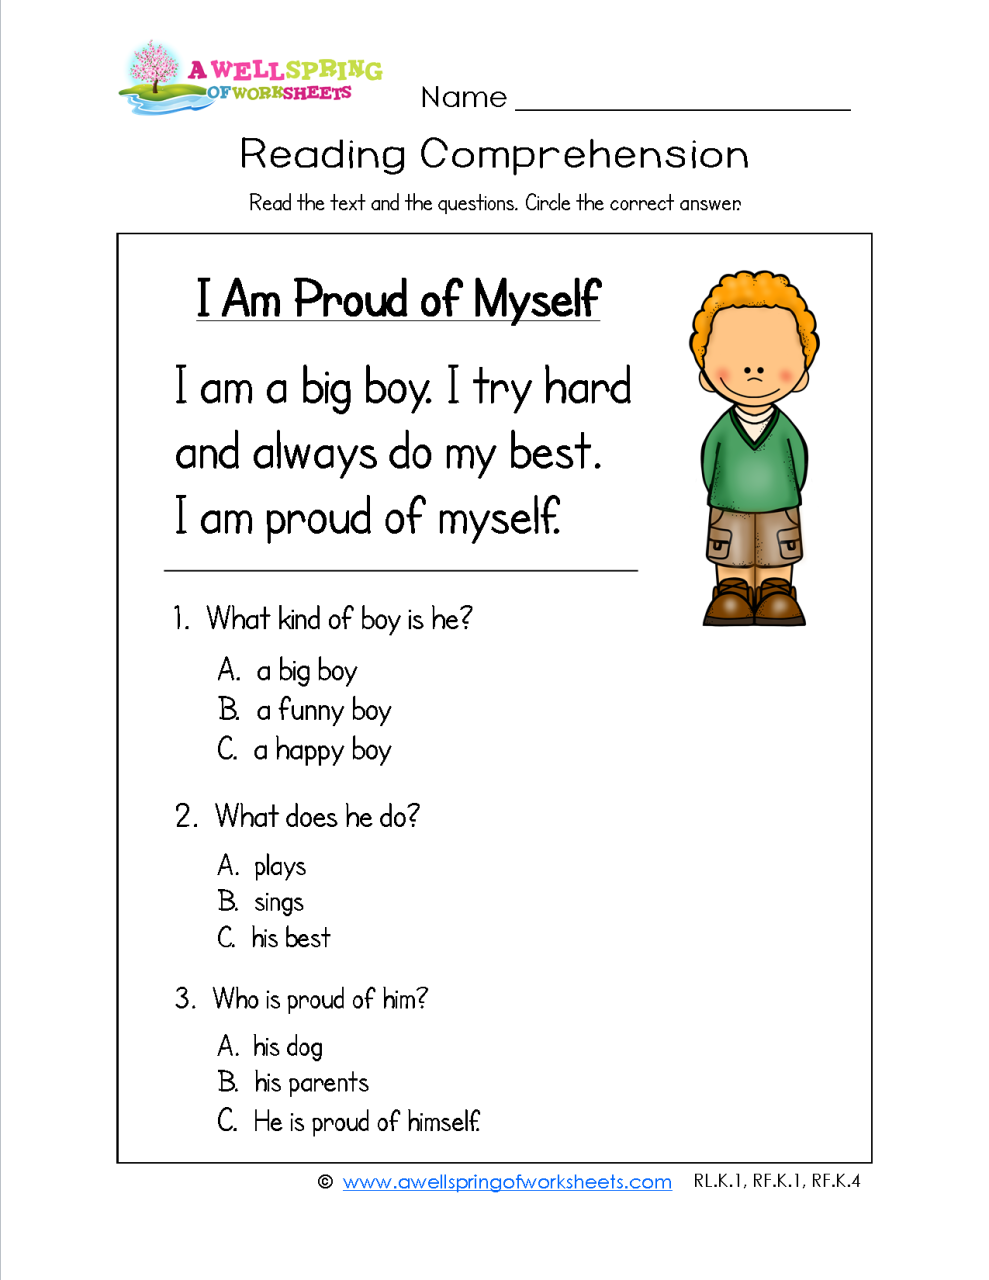 Reading Comprehension For Kindergarten With Questions